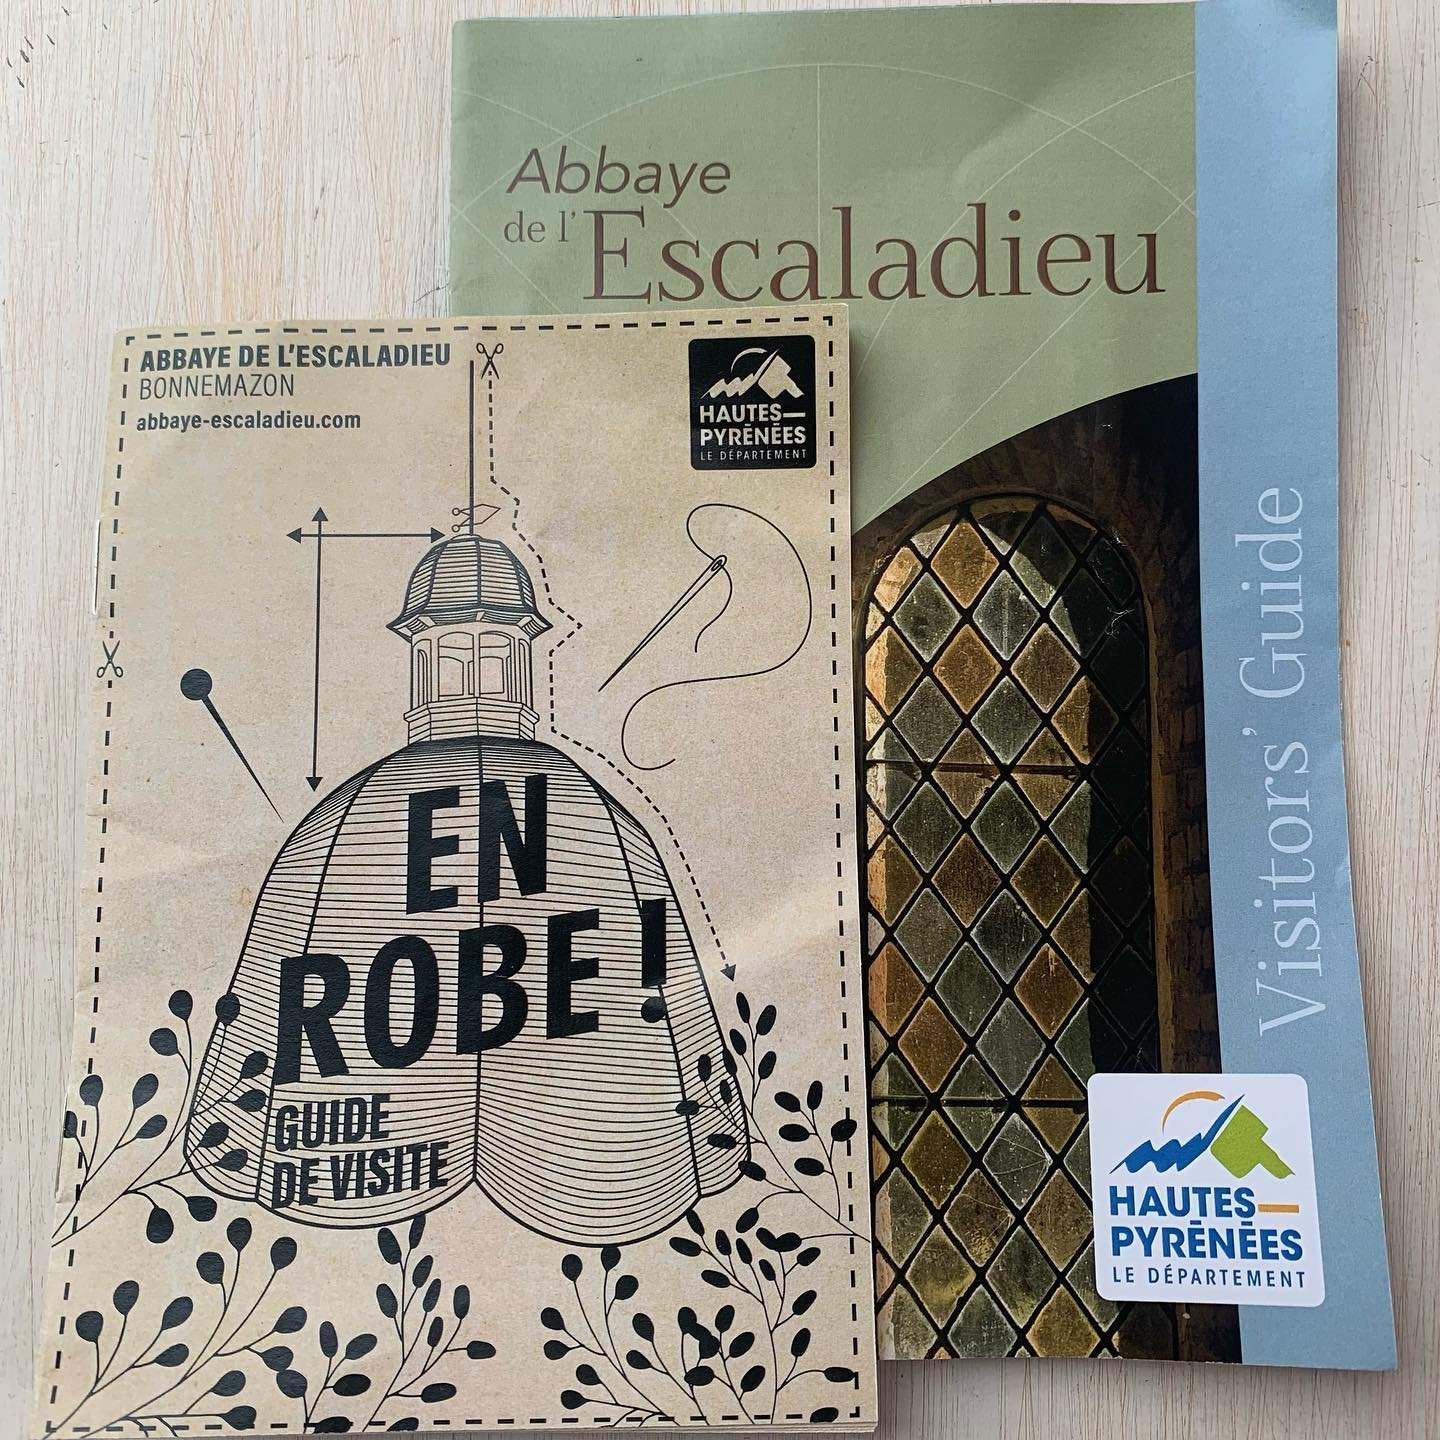 Visit to Abbaye de l&rsquo;Escaladieu to taste the fruit pate/sweets made my local monks, walk around the old abbey and view the artwork displayed in the buildings and grounds. The sun came out too. Wonderful exhibition, wiyh most works havibg a stro